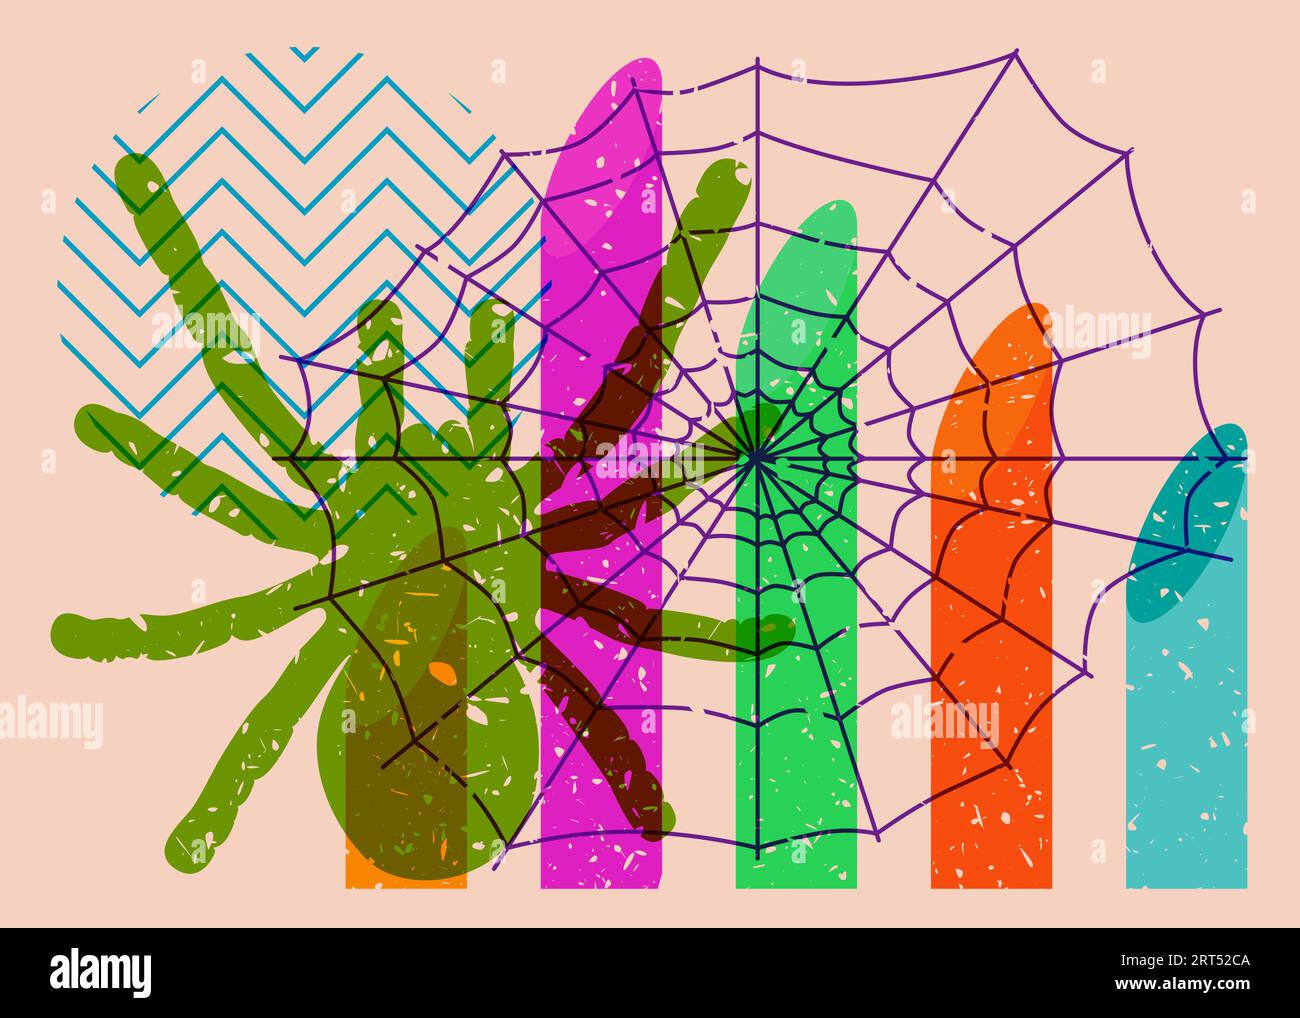 Spider and spider web with geometric shapes. Object in trendy riso graph design for Halloween. Geometry elements abstract risograph print texture styl Stock Vector